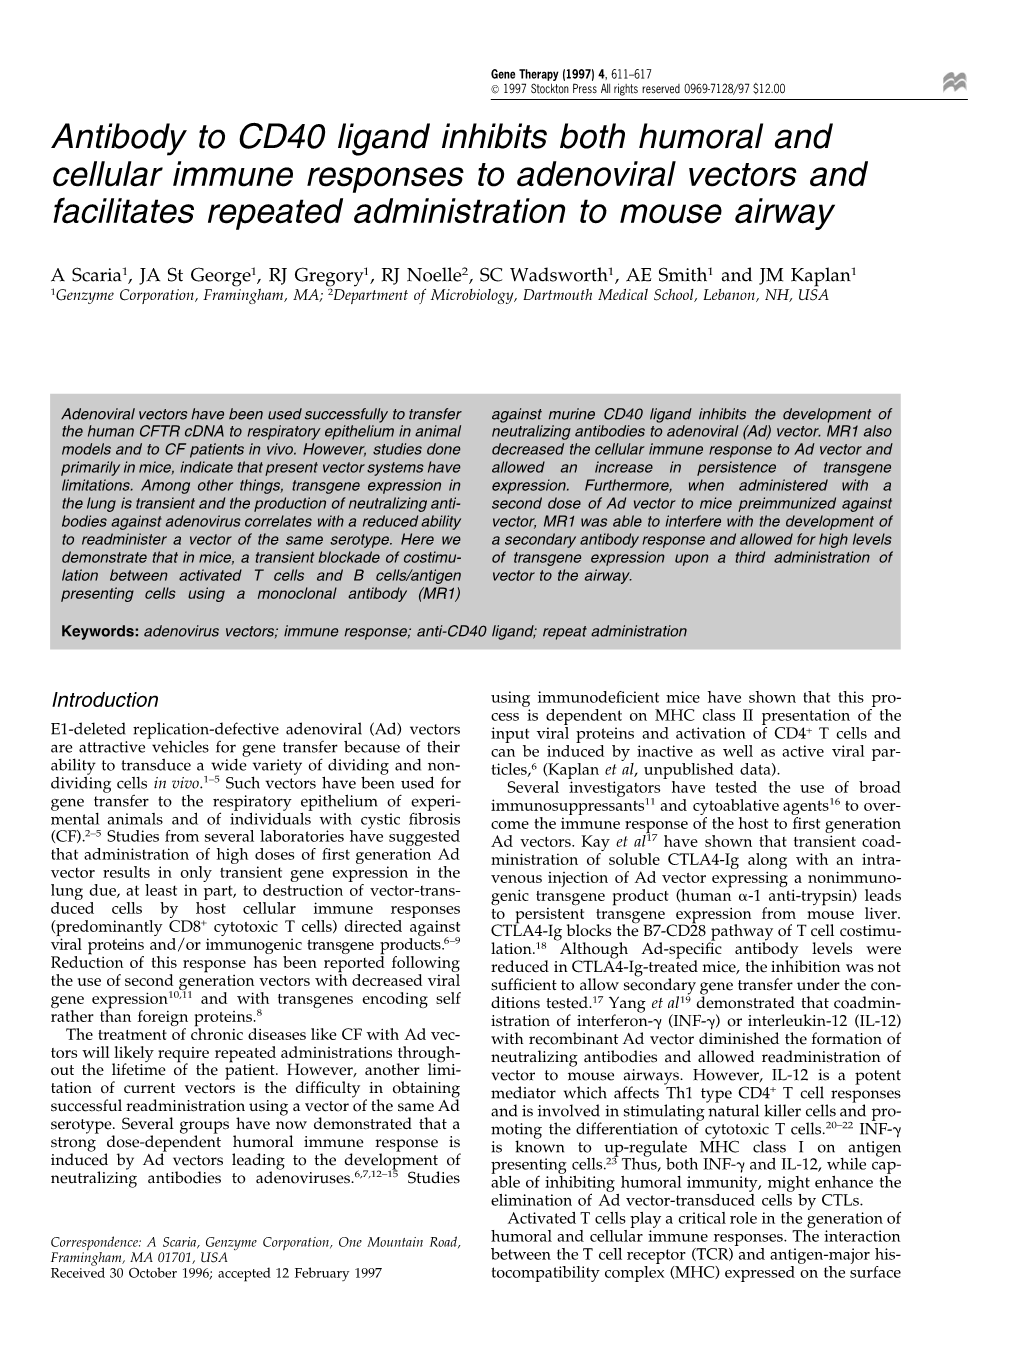 Antibody to CD40 Ligand Inhibits Both Humoral and Cellular Immune Responses to Adenoviral Vectors and Facilitates Repeated Administration to Mouse Airway